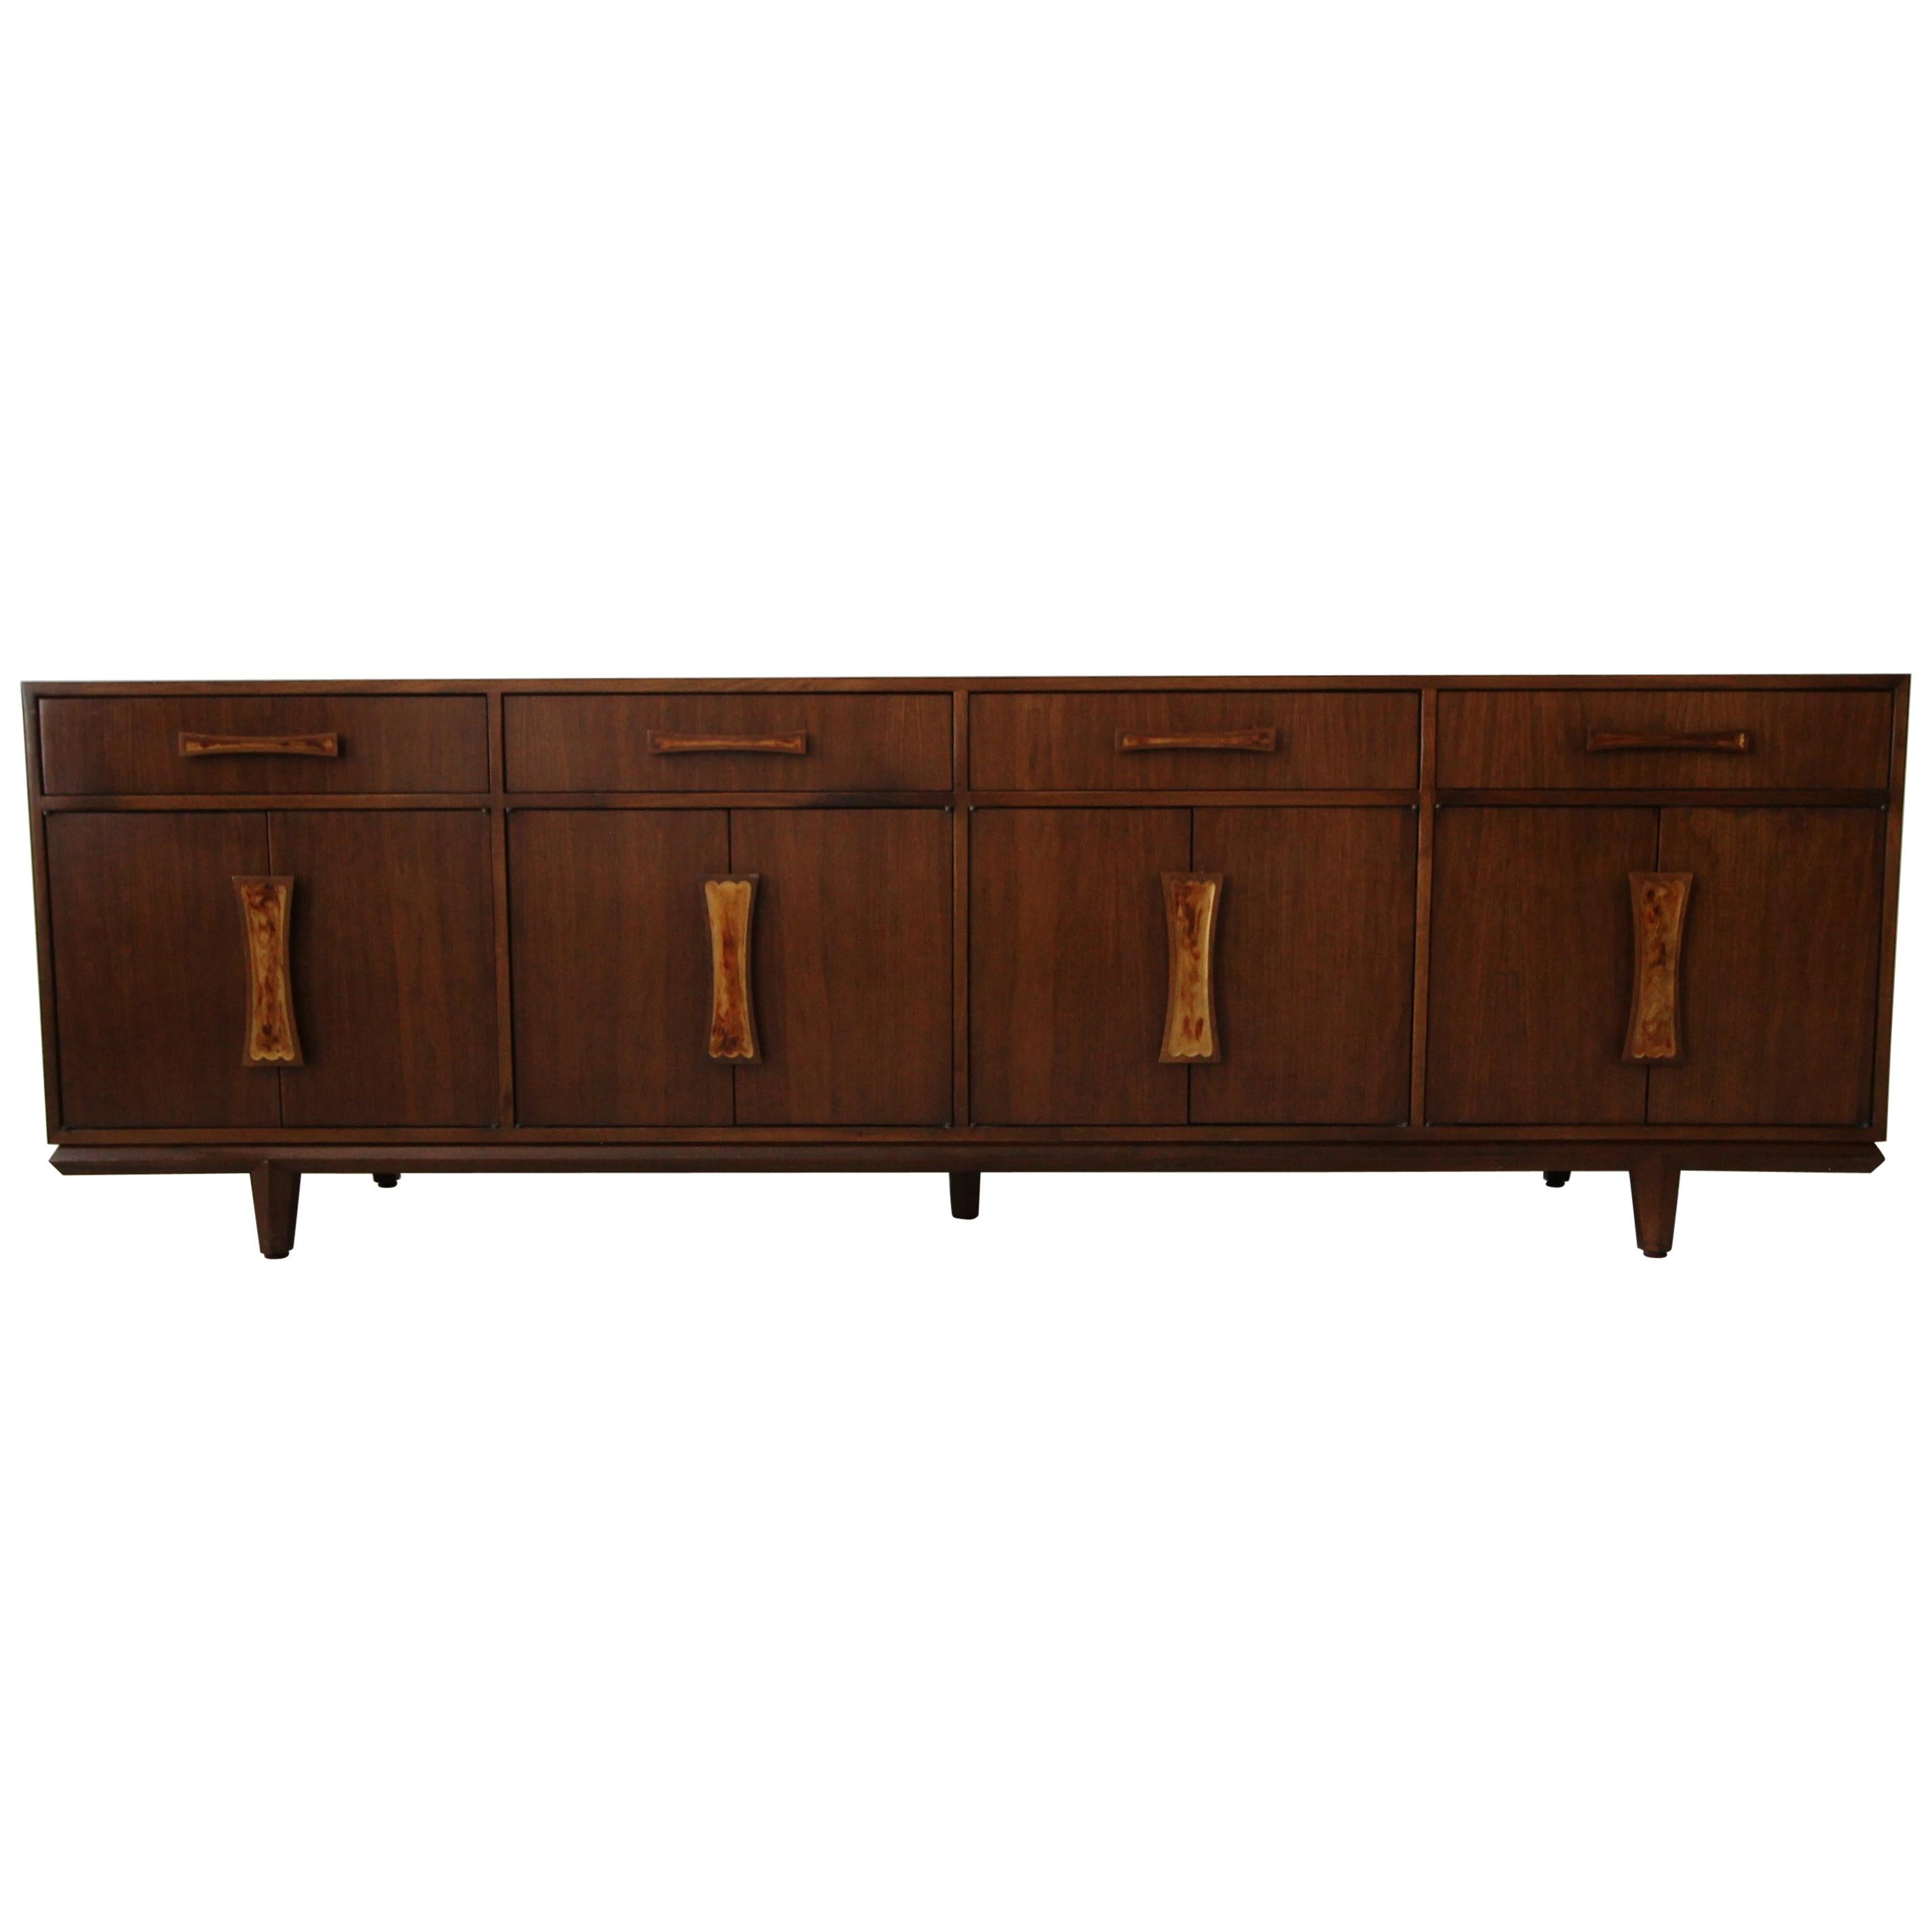 Monumental Midcentury Walnut Credenza with Inlay Handles by Cal Mode Furniture